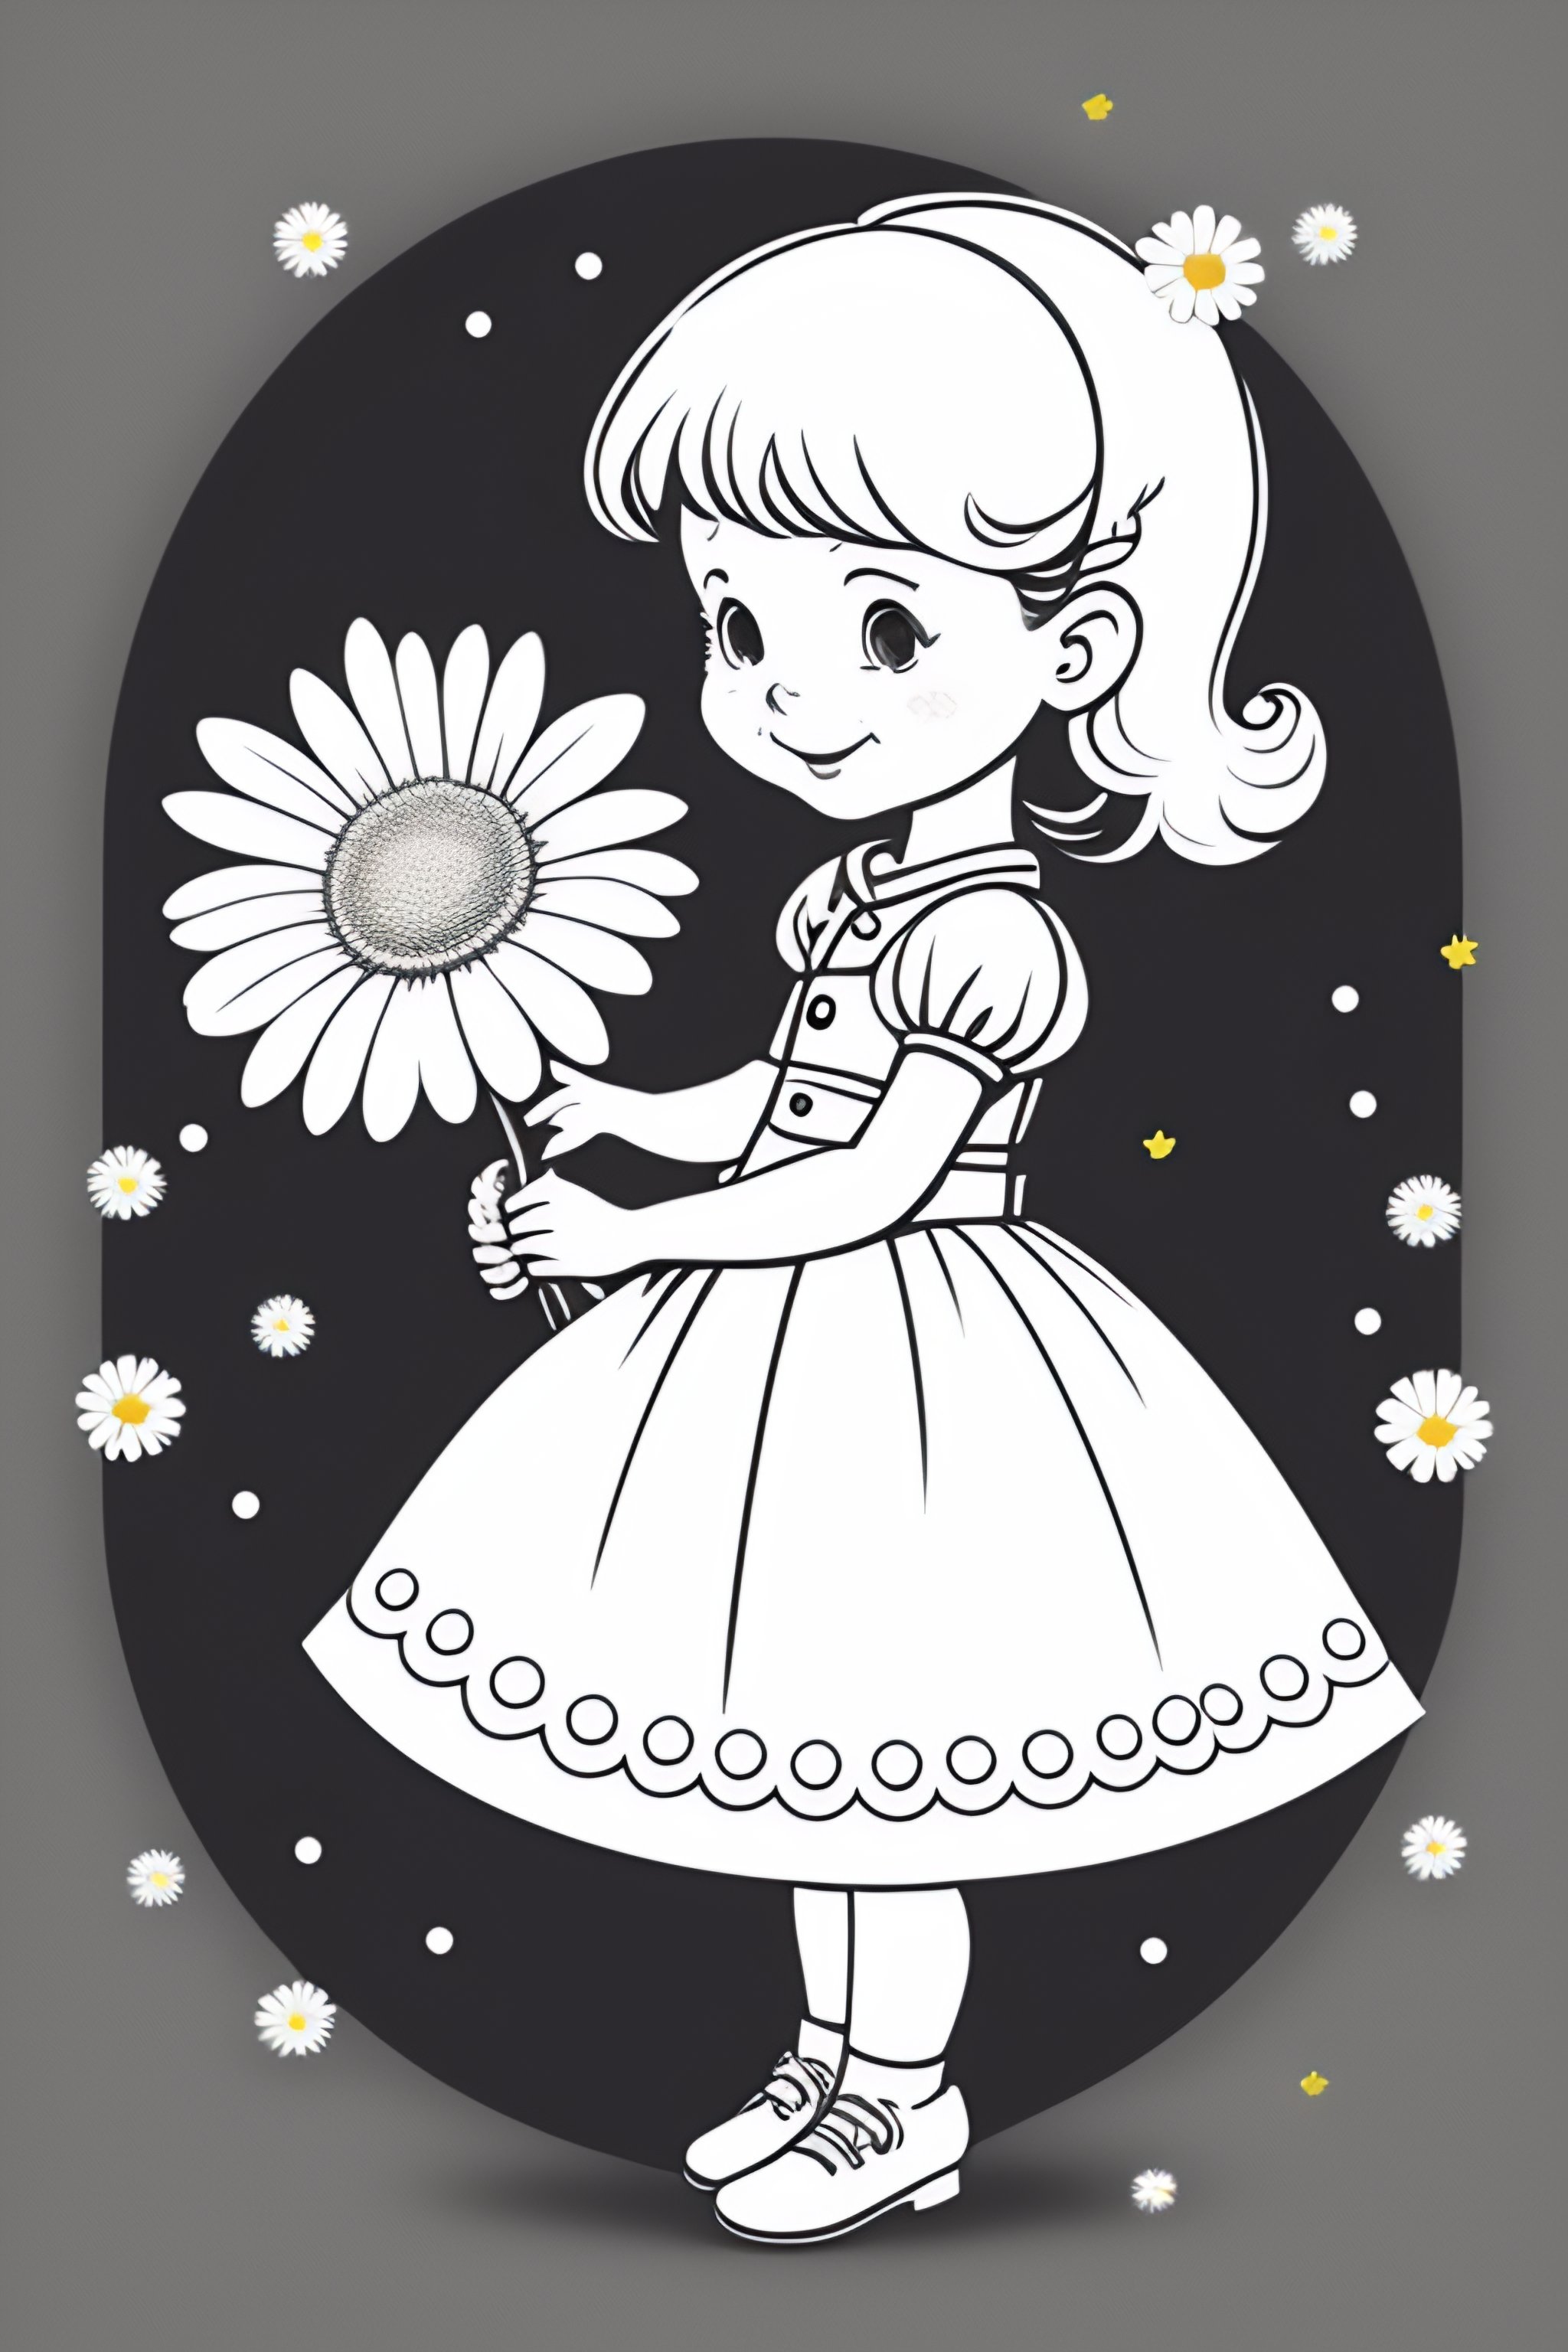 cute girl cartoon images black and white